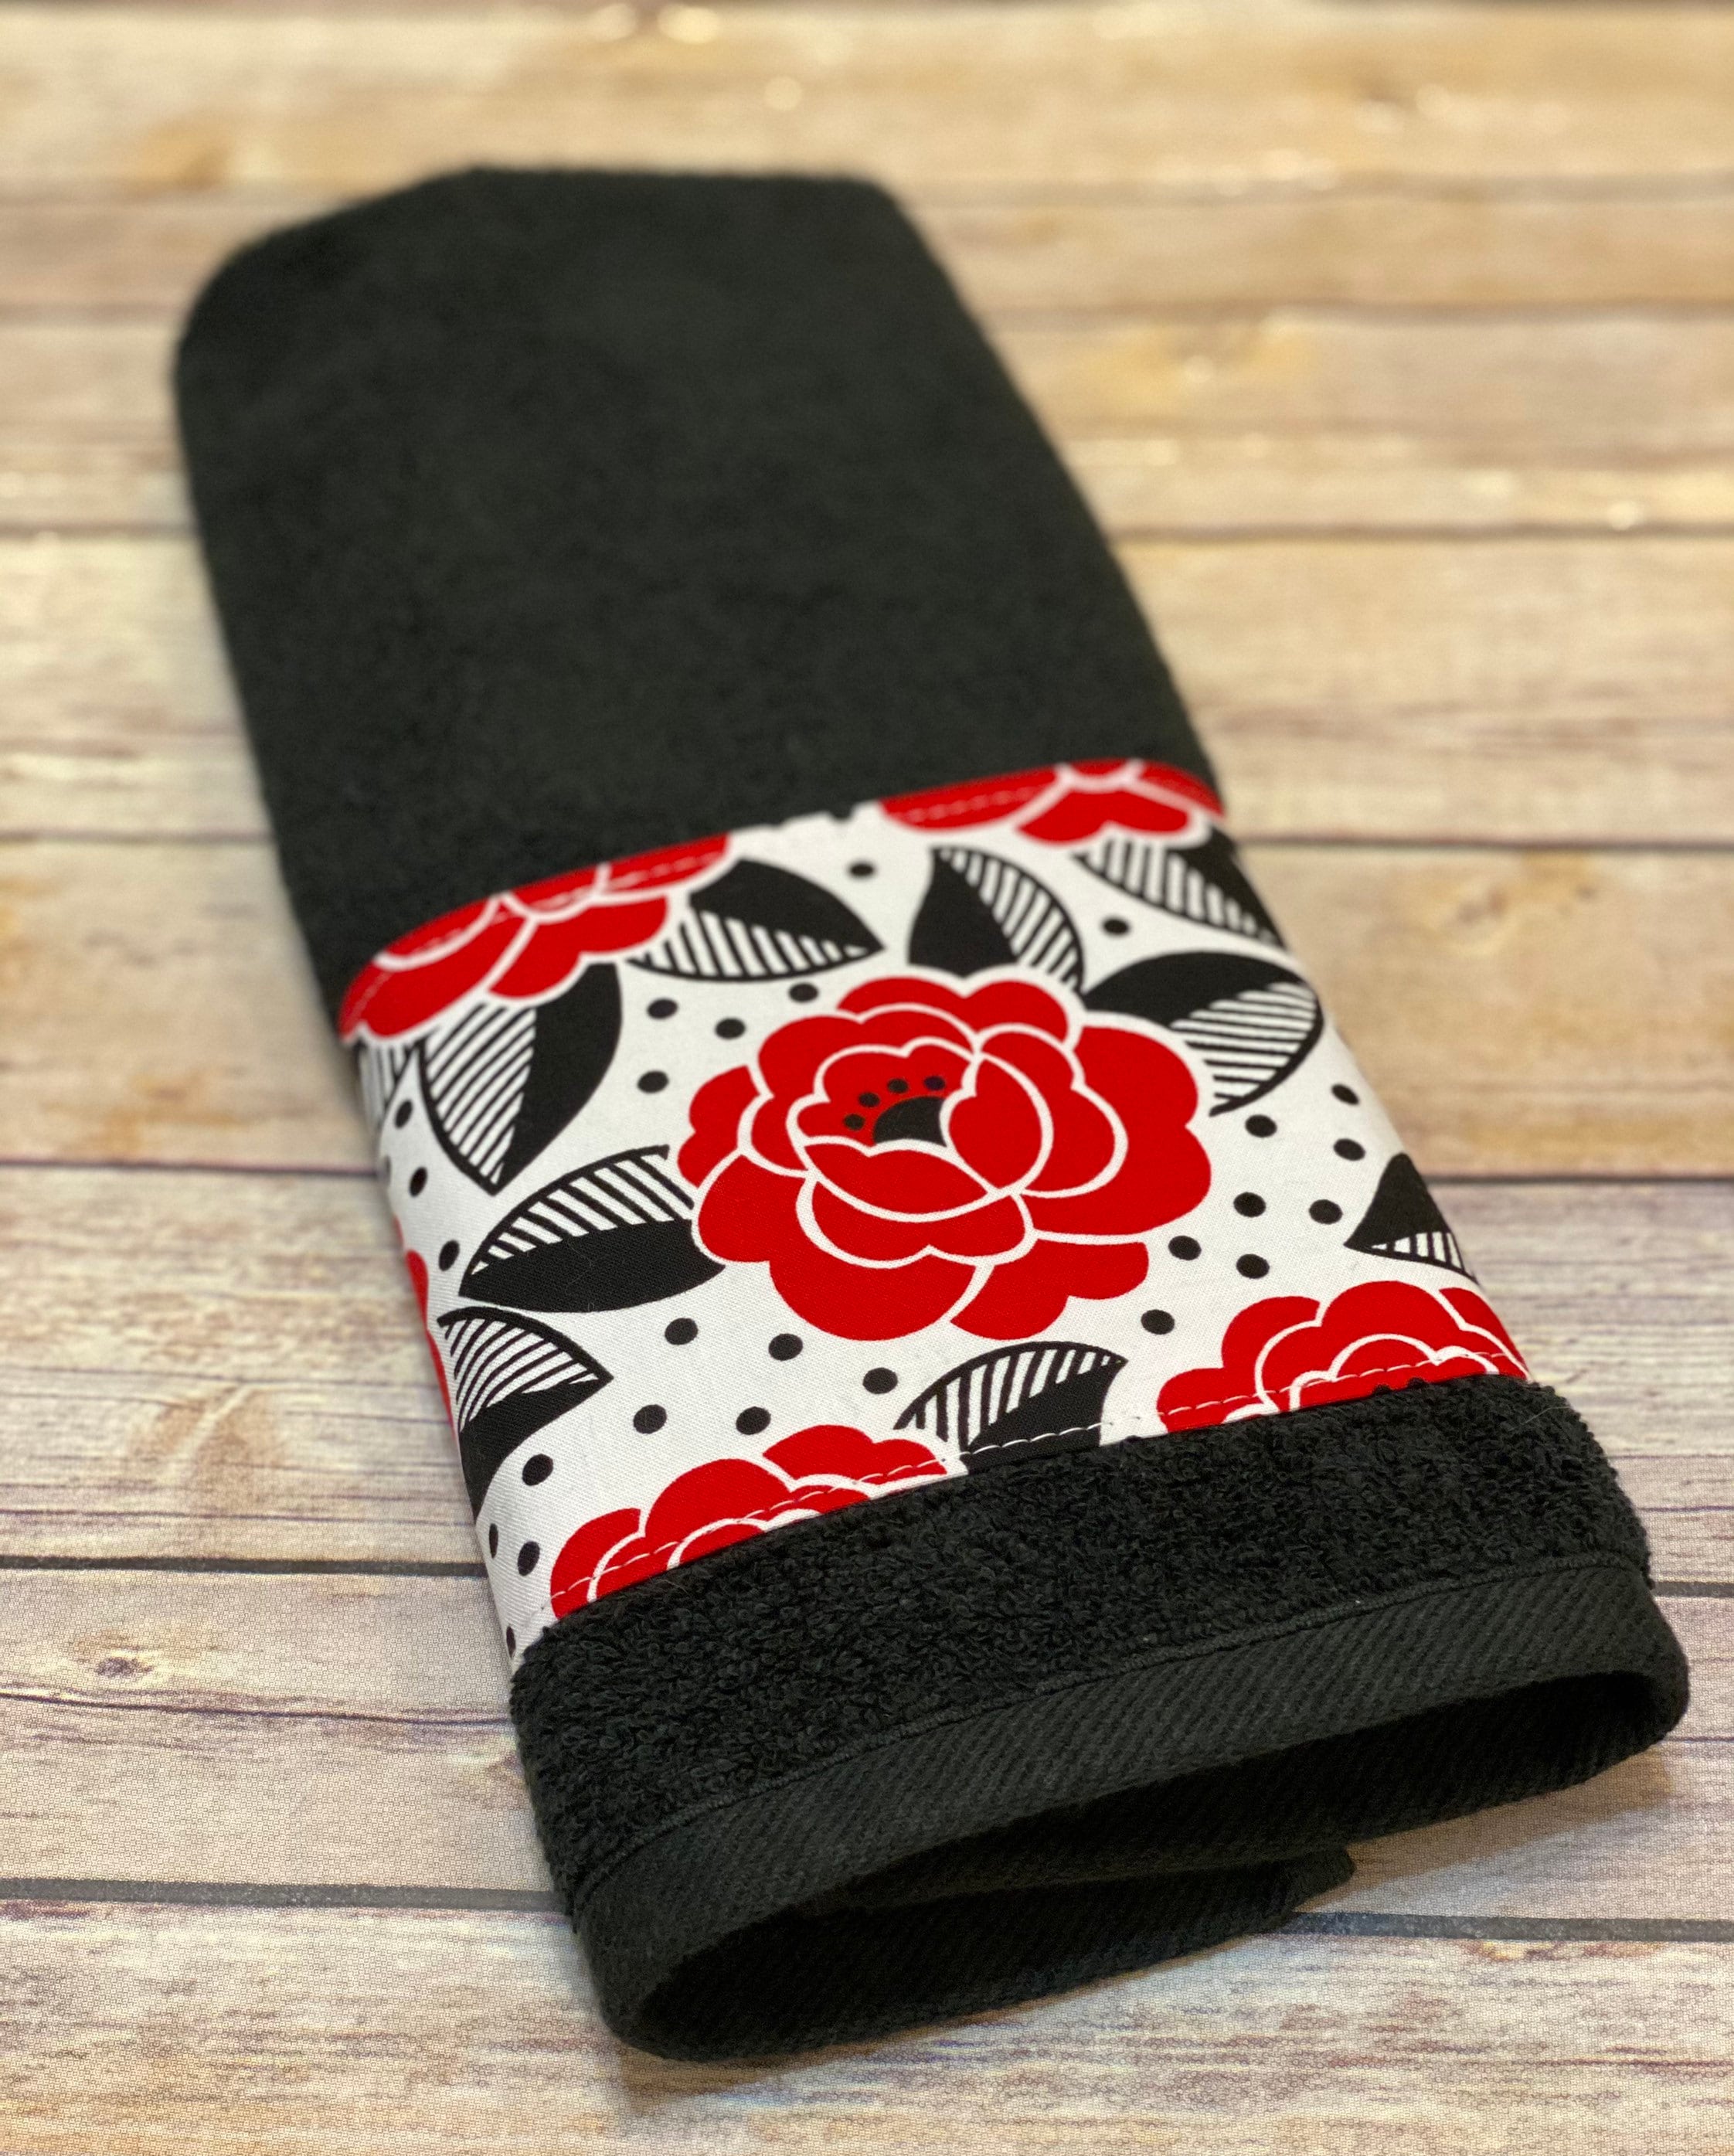 Red & Black Kitchen Towels, Red and Black Dish Towels, Red and Black Kitchen  Hand Towels, Red and Black Heavy Kitchen Towels 